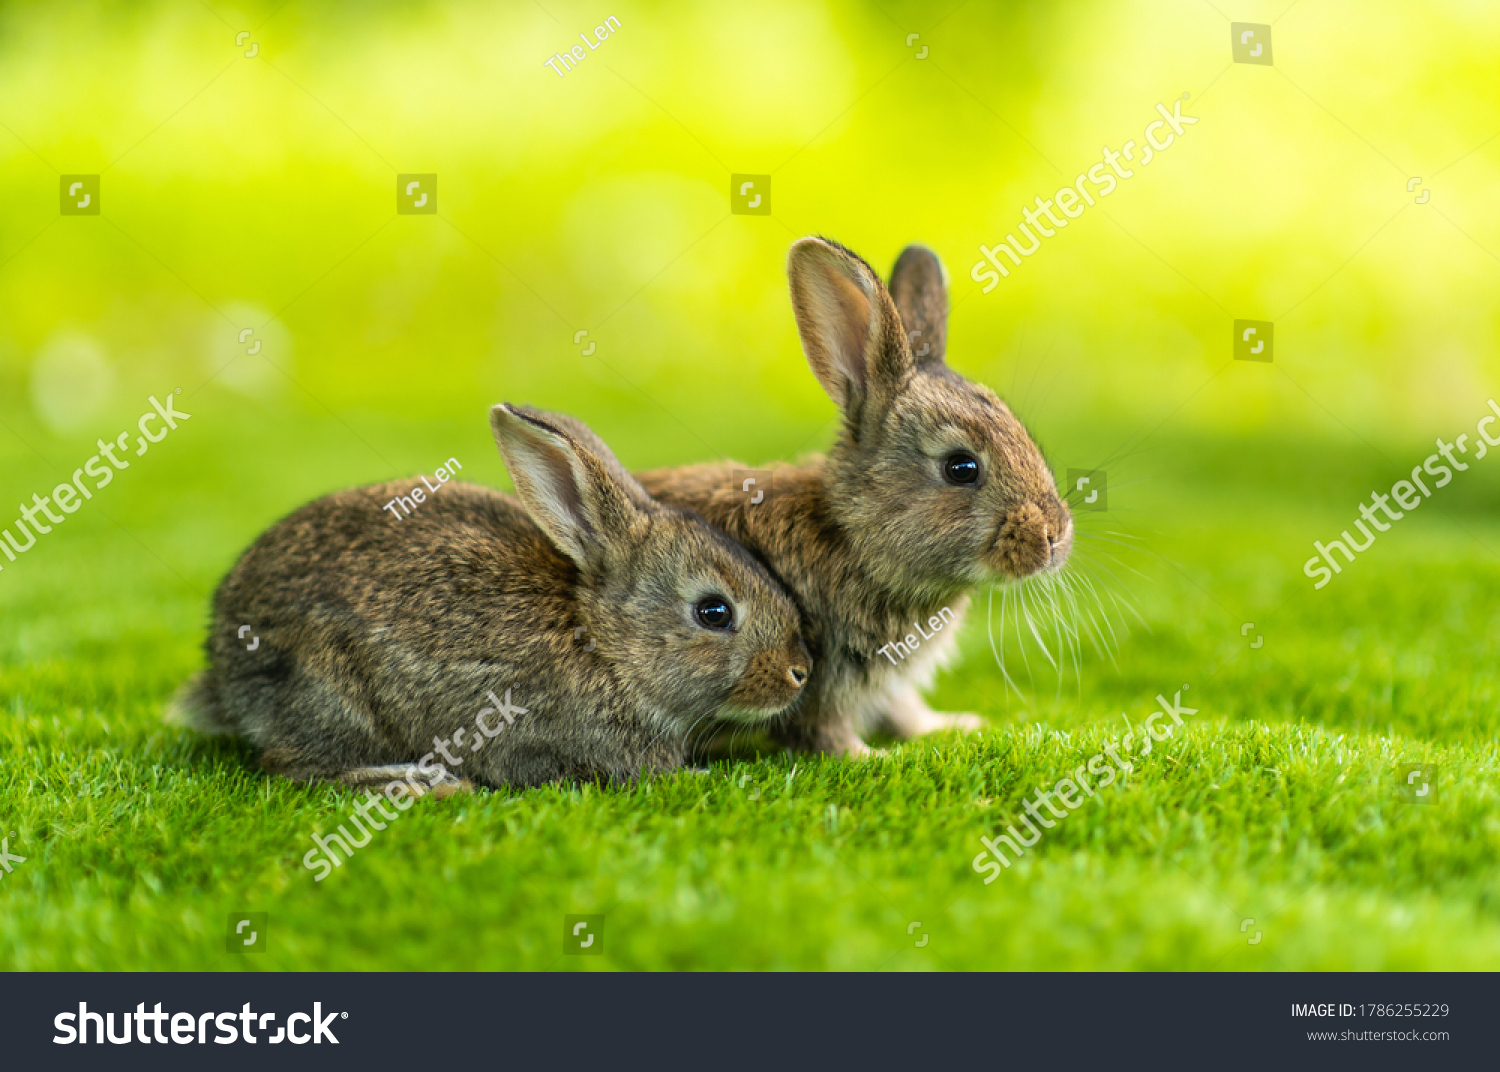 Rabbits. Cute little Easter bunny in the meadow. Green grass under the sunbeams. two rabbits on a green grass in summer day. #1786255229